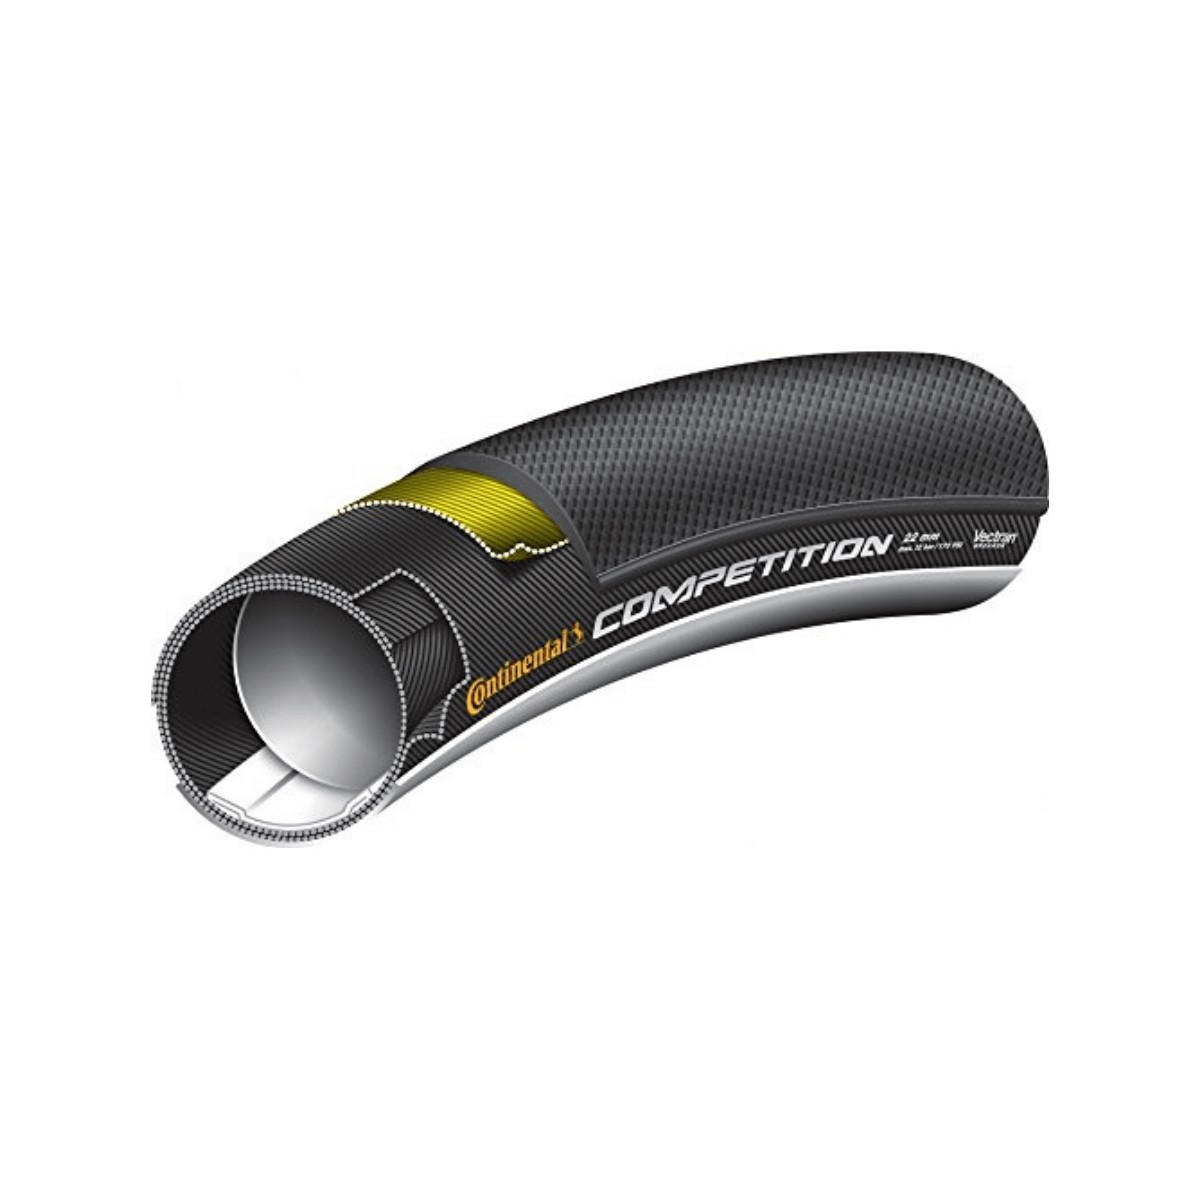 Continental Competition Black Tubular Tire 700 x 22-25, Type mm Black 28 x 22mm